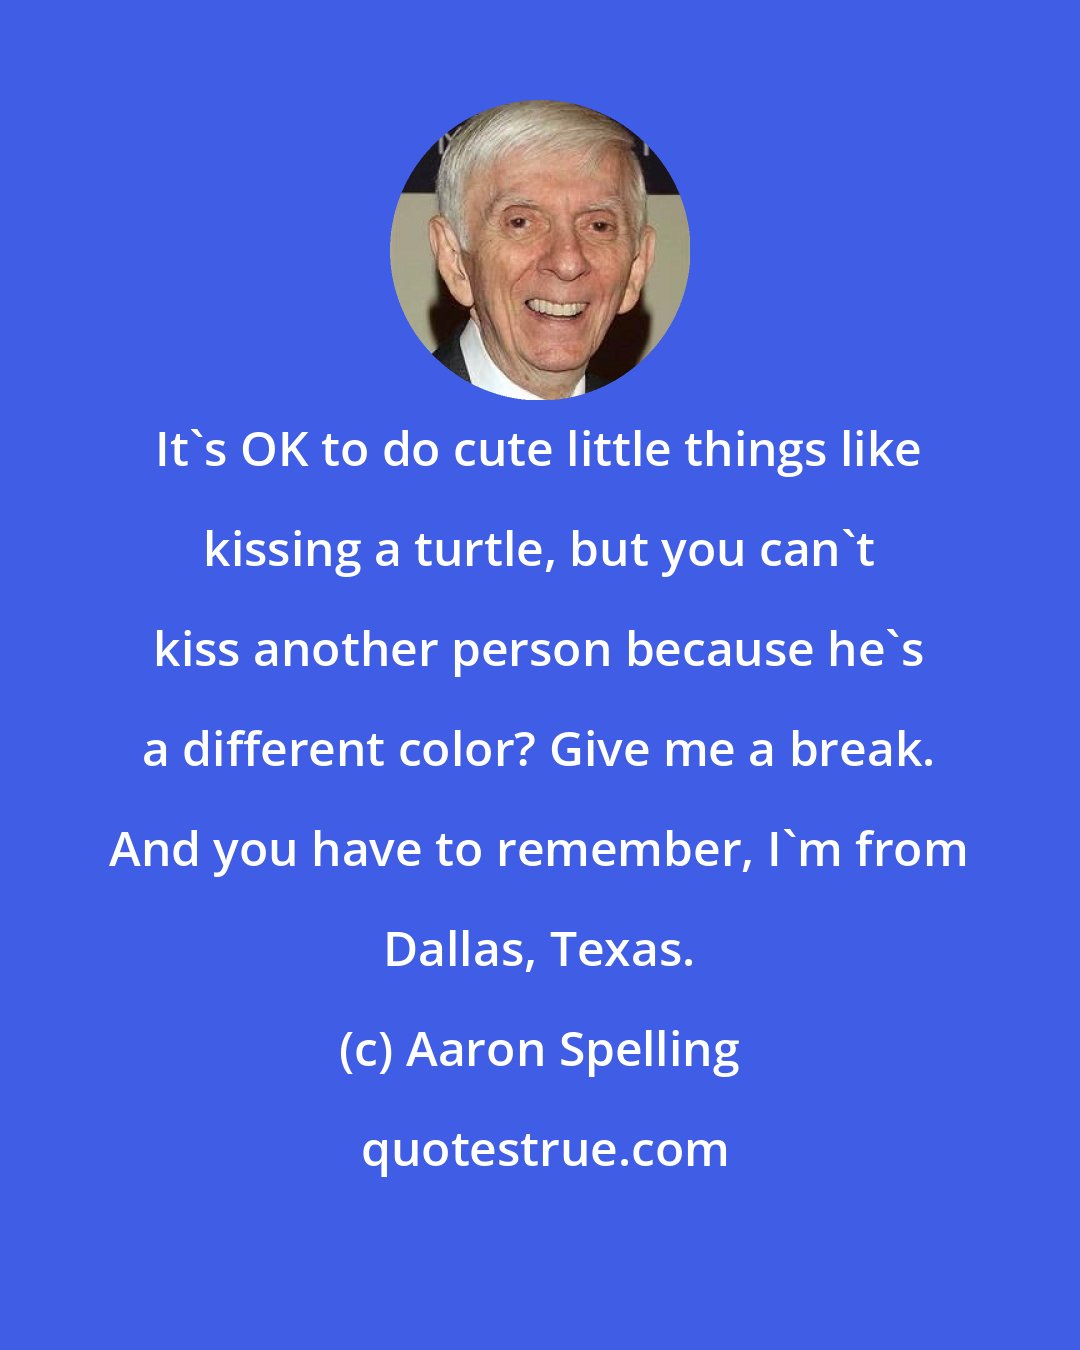 Aaron Spelling: It's OK to do cute little things like kissing a turtle, but you can't kiss another person because he's a different color? Give me a break. And you have to remember, I'm from Dallas, Texas.